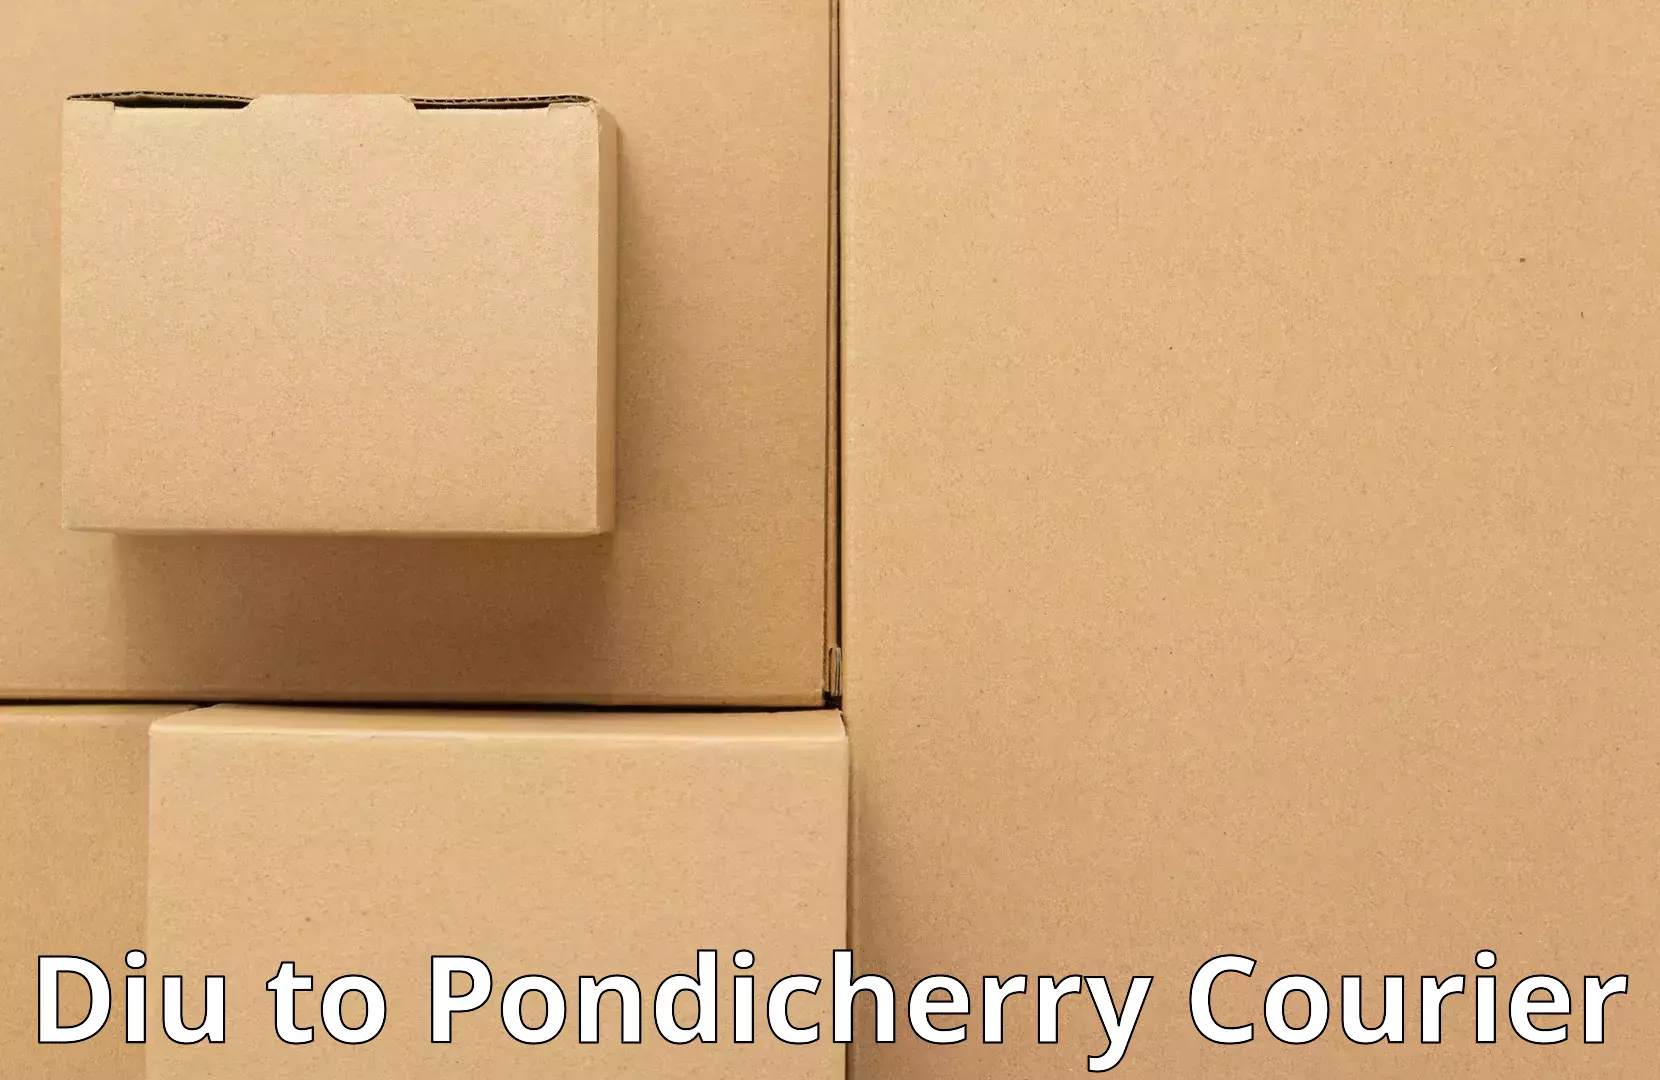 Moving and packing experts Diu to Pondicherry University